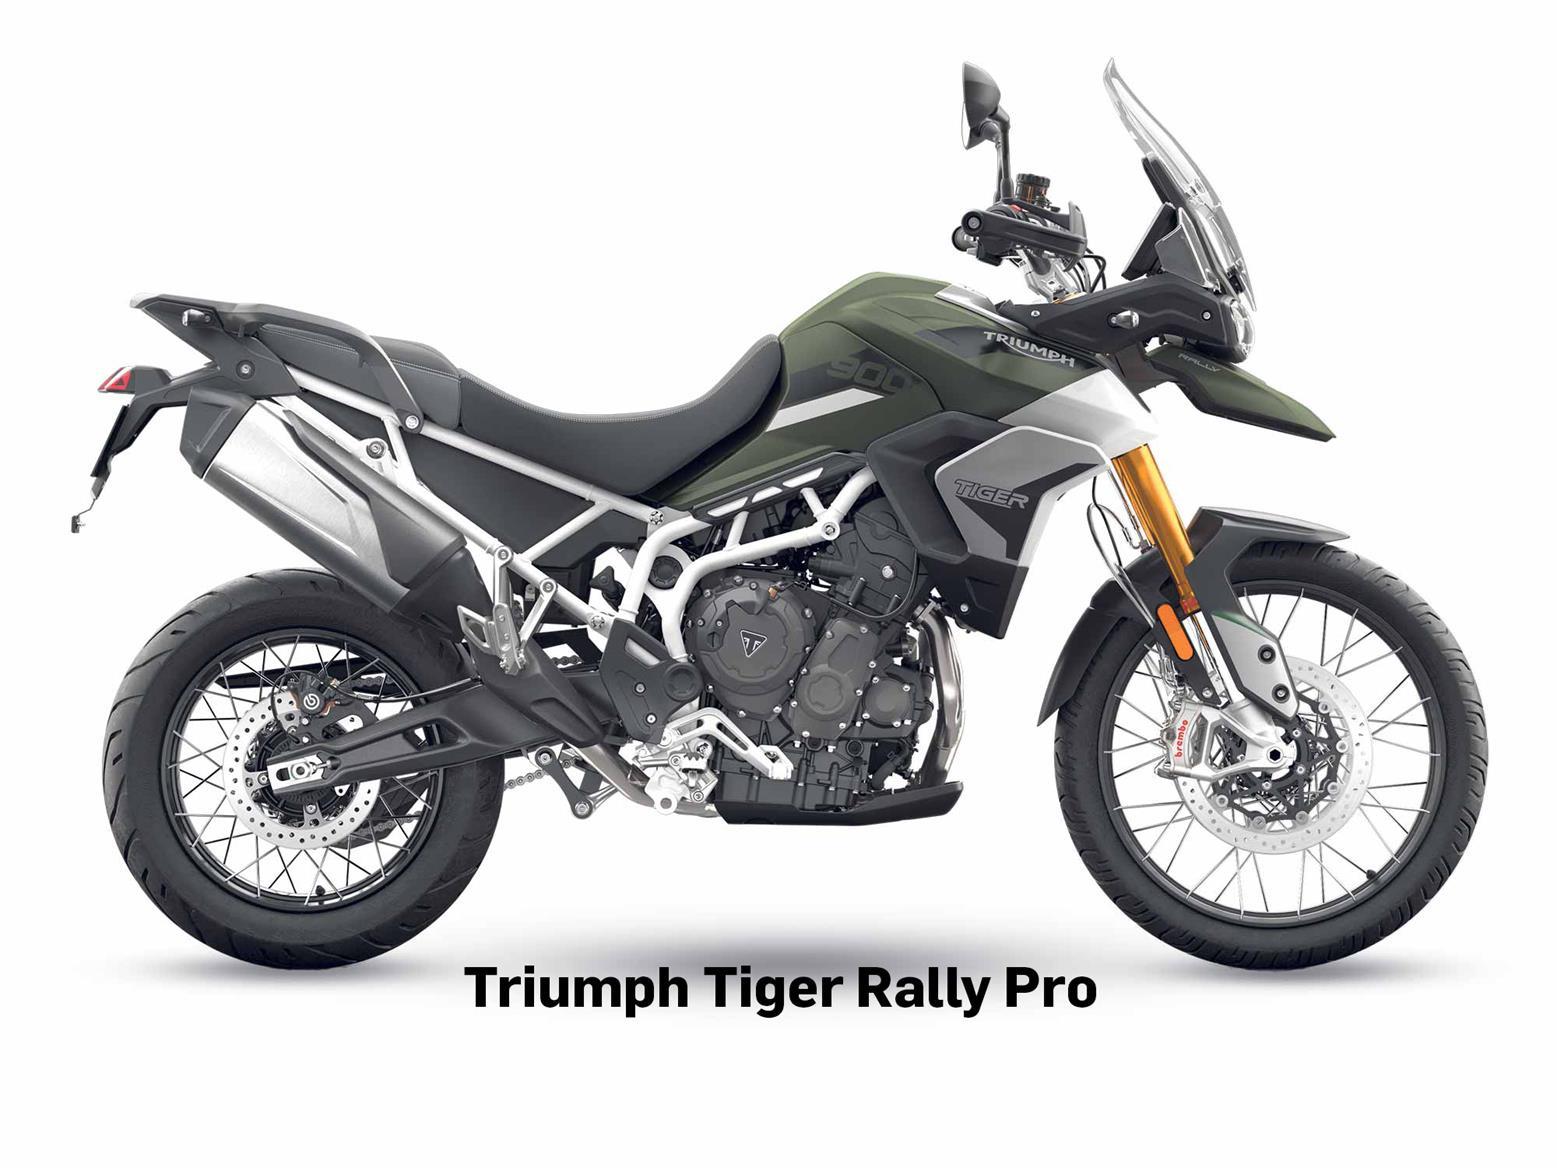 Read MCN's expert Triumph Tiger 900 Rally Pro long-term test here